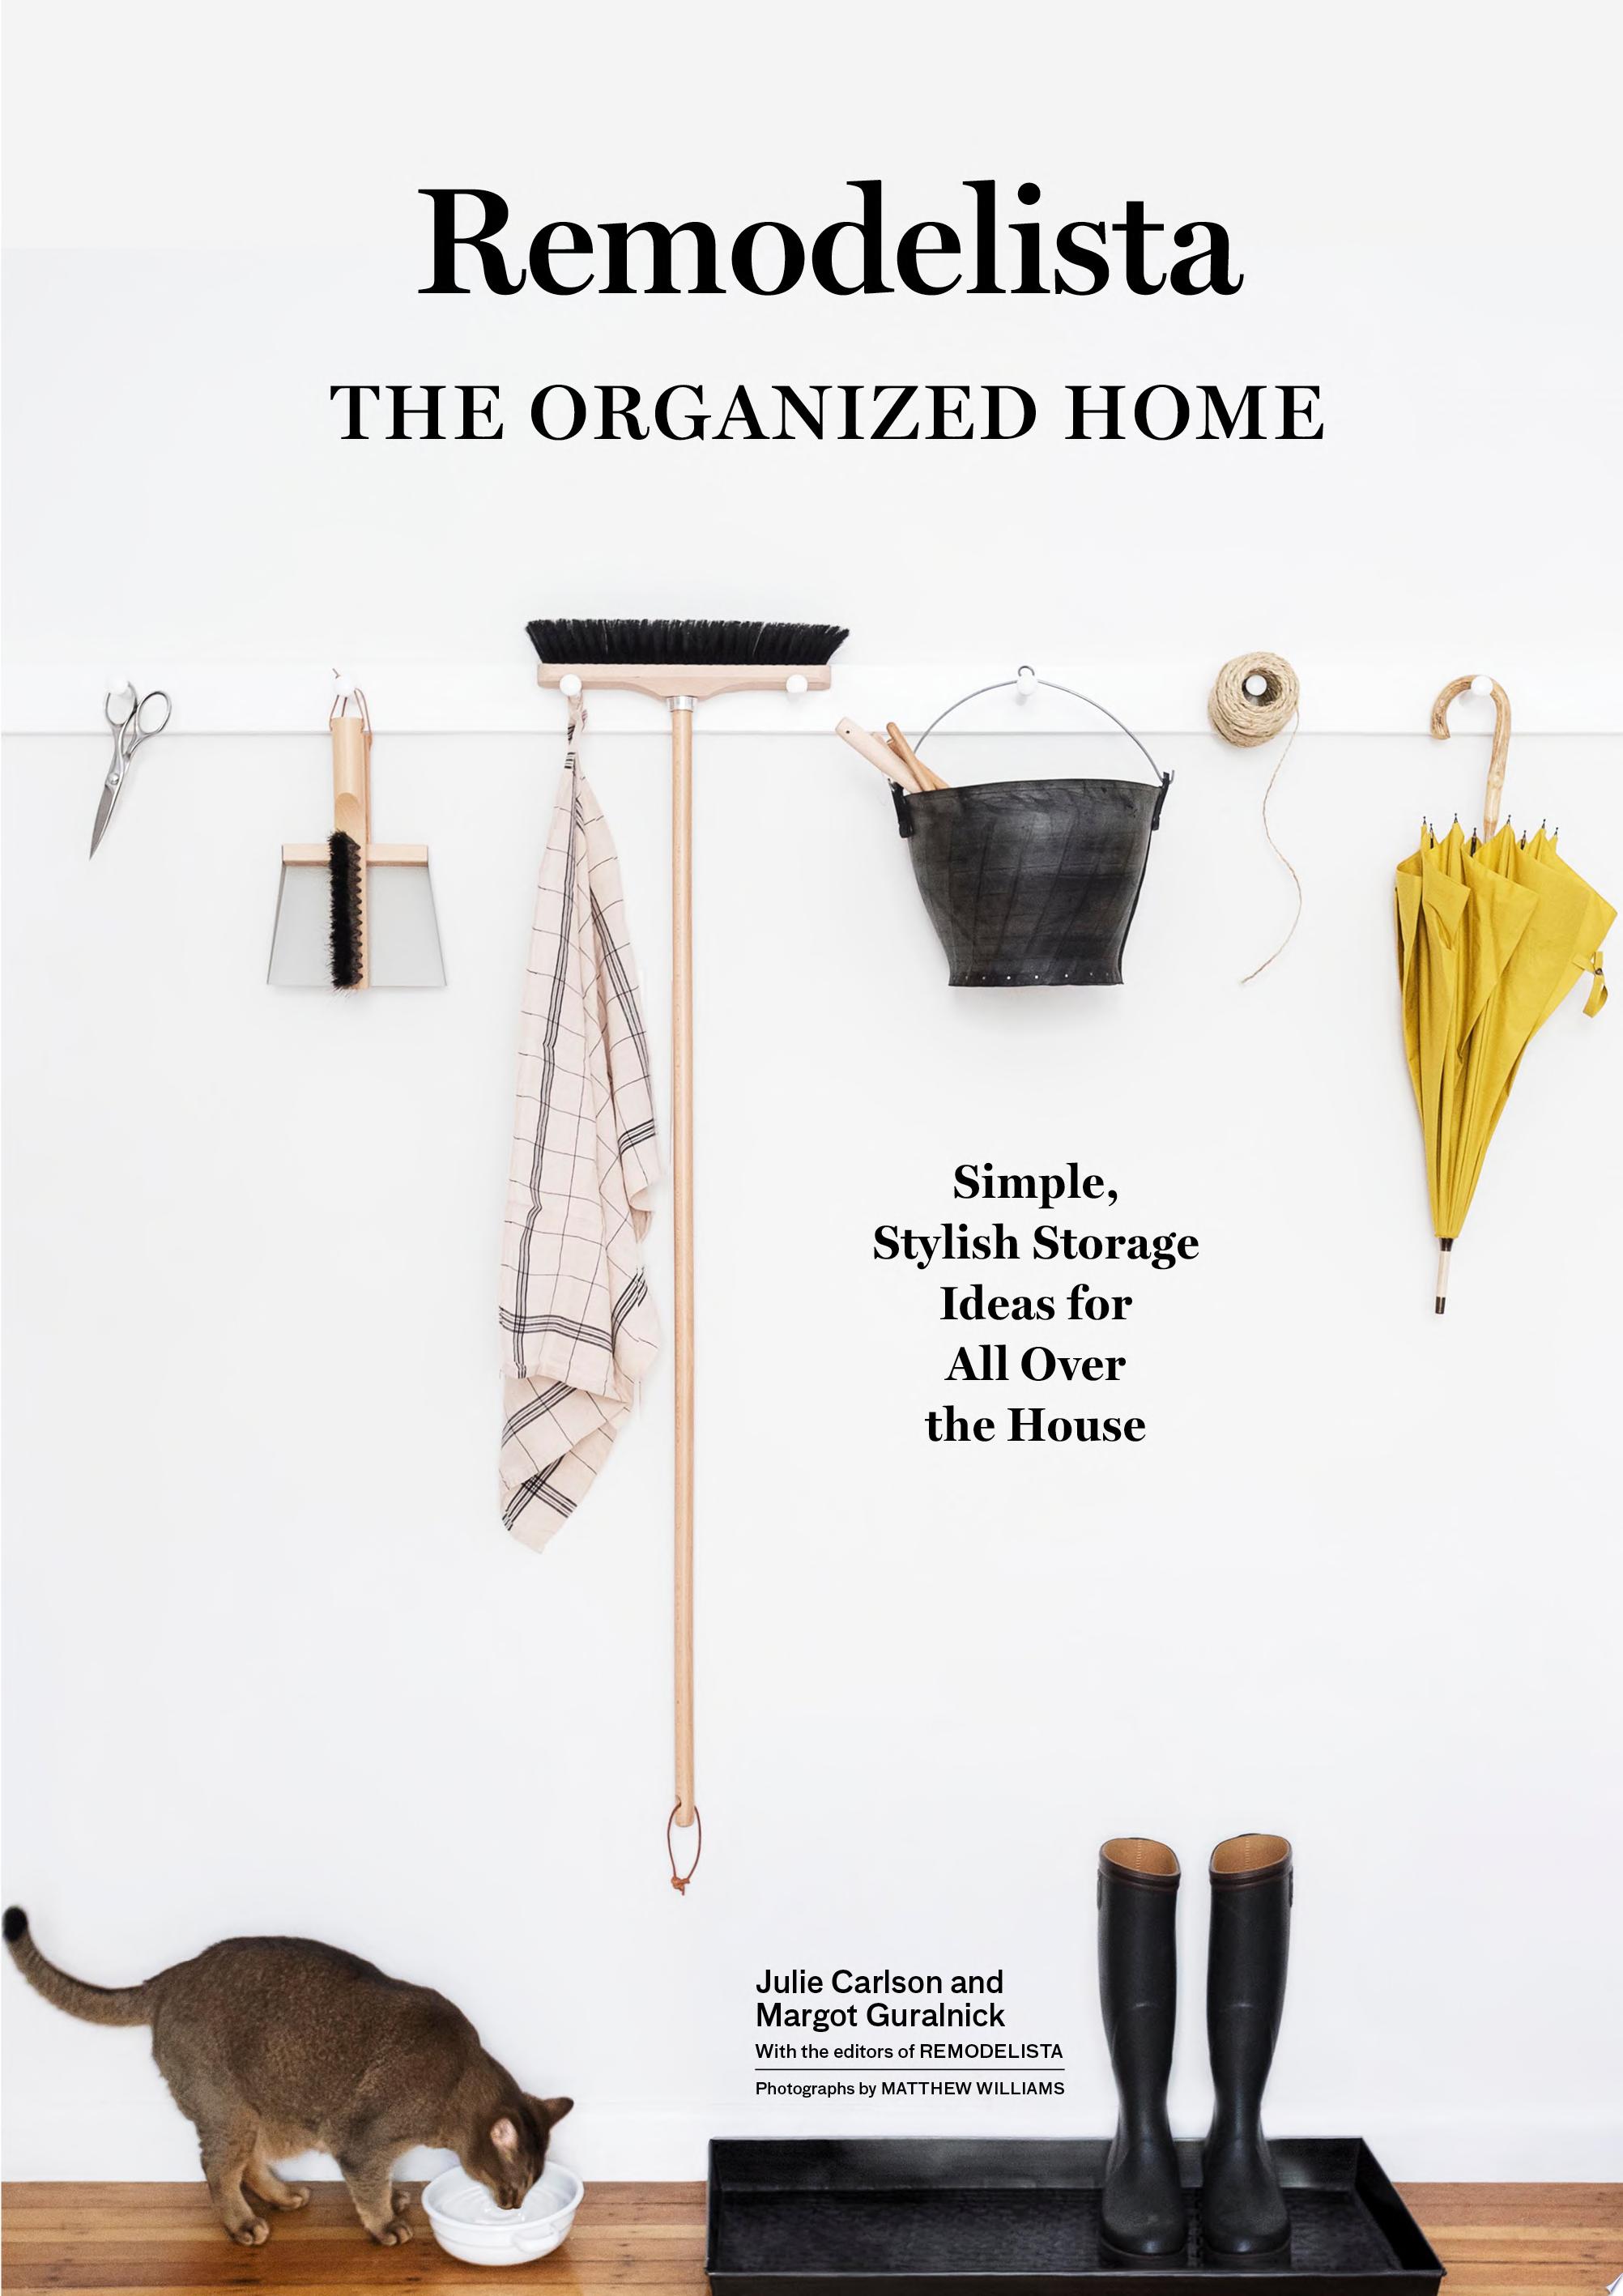 Image for "Remodelista: The Organized Home"